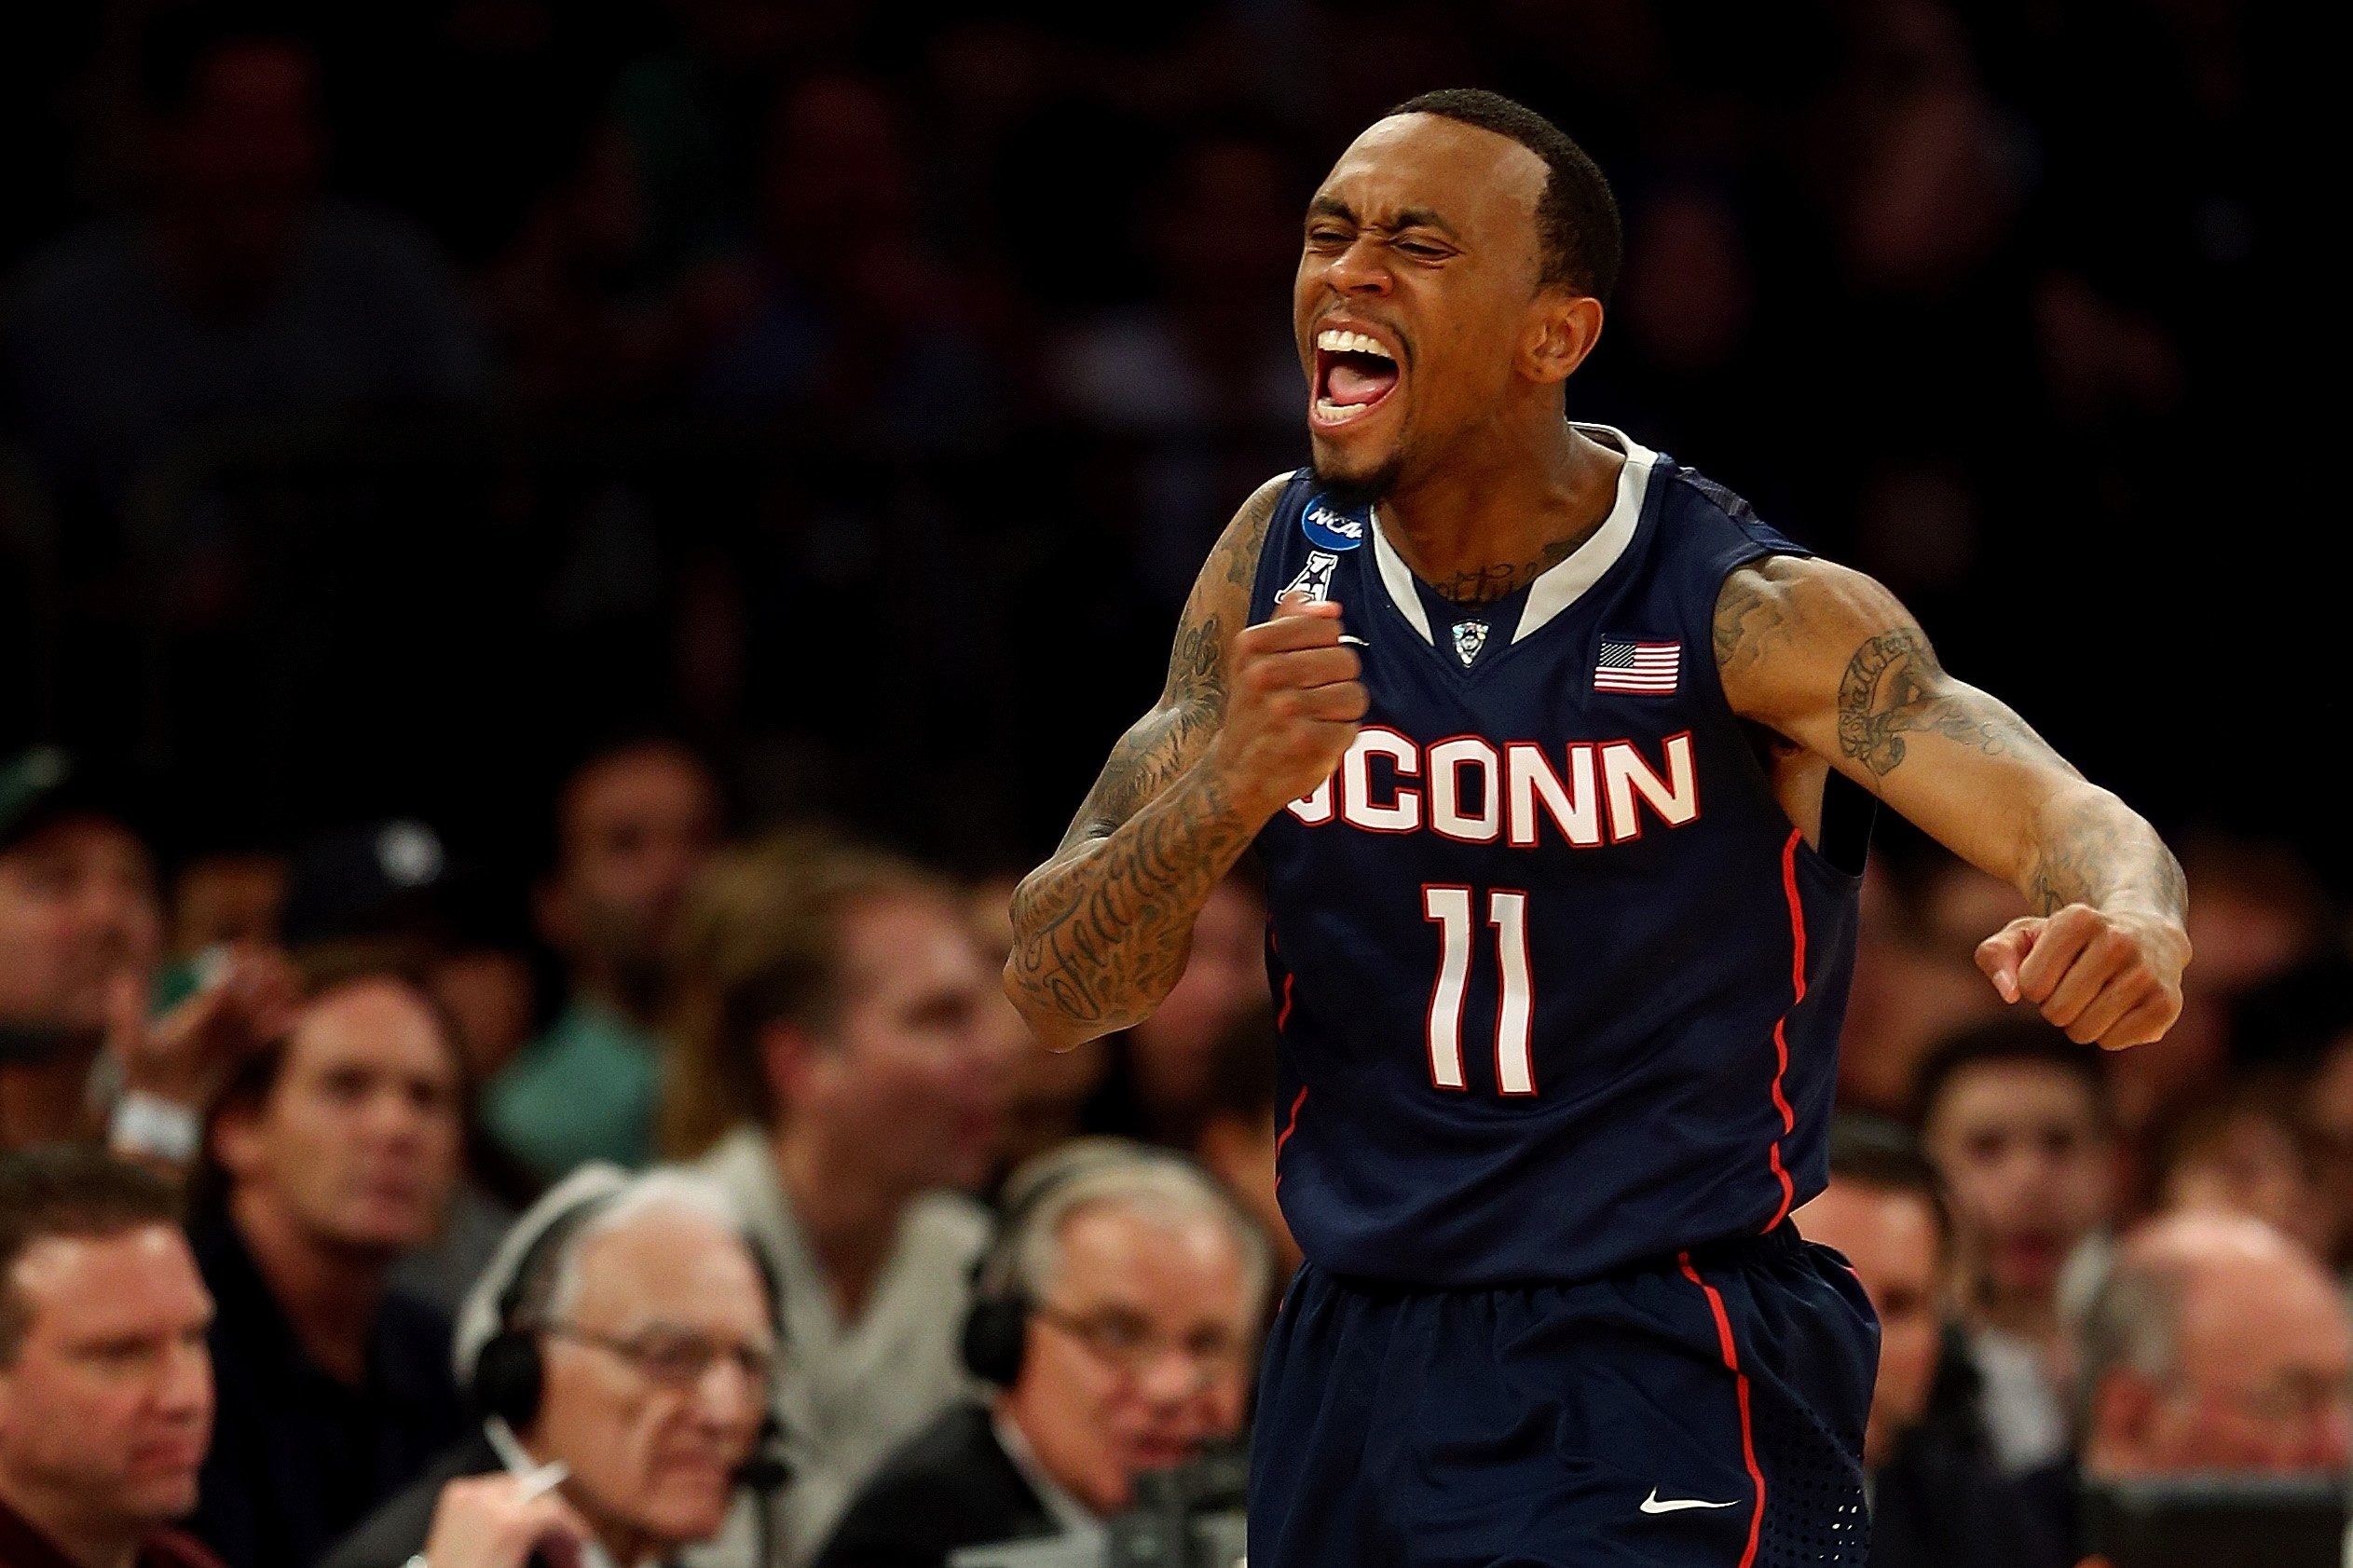 Ryan Boatright of the Connecticut Huskies reacts after a turnover by the Michigan State Spartans in the second half of the East Regional Final of the 2014 NCAA Men's Basketball Tournament at Madison Square Garden on March 30, 2014 in New York City. (Elsa—Getty Images)